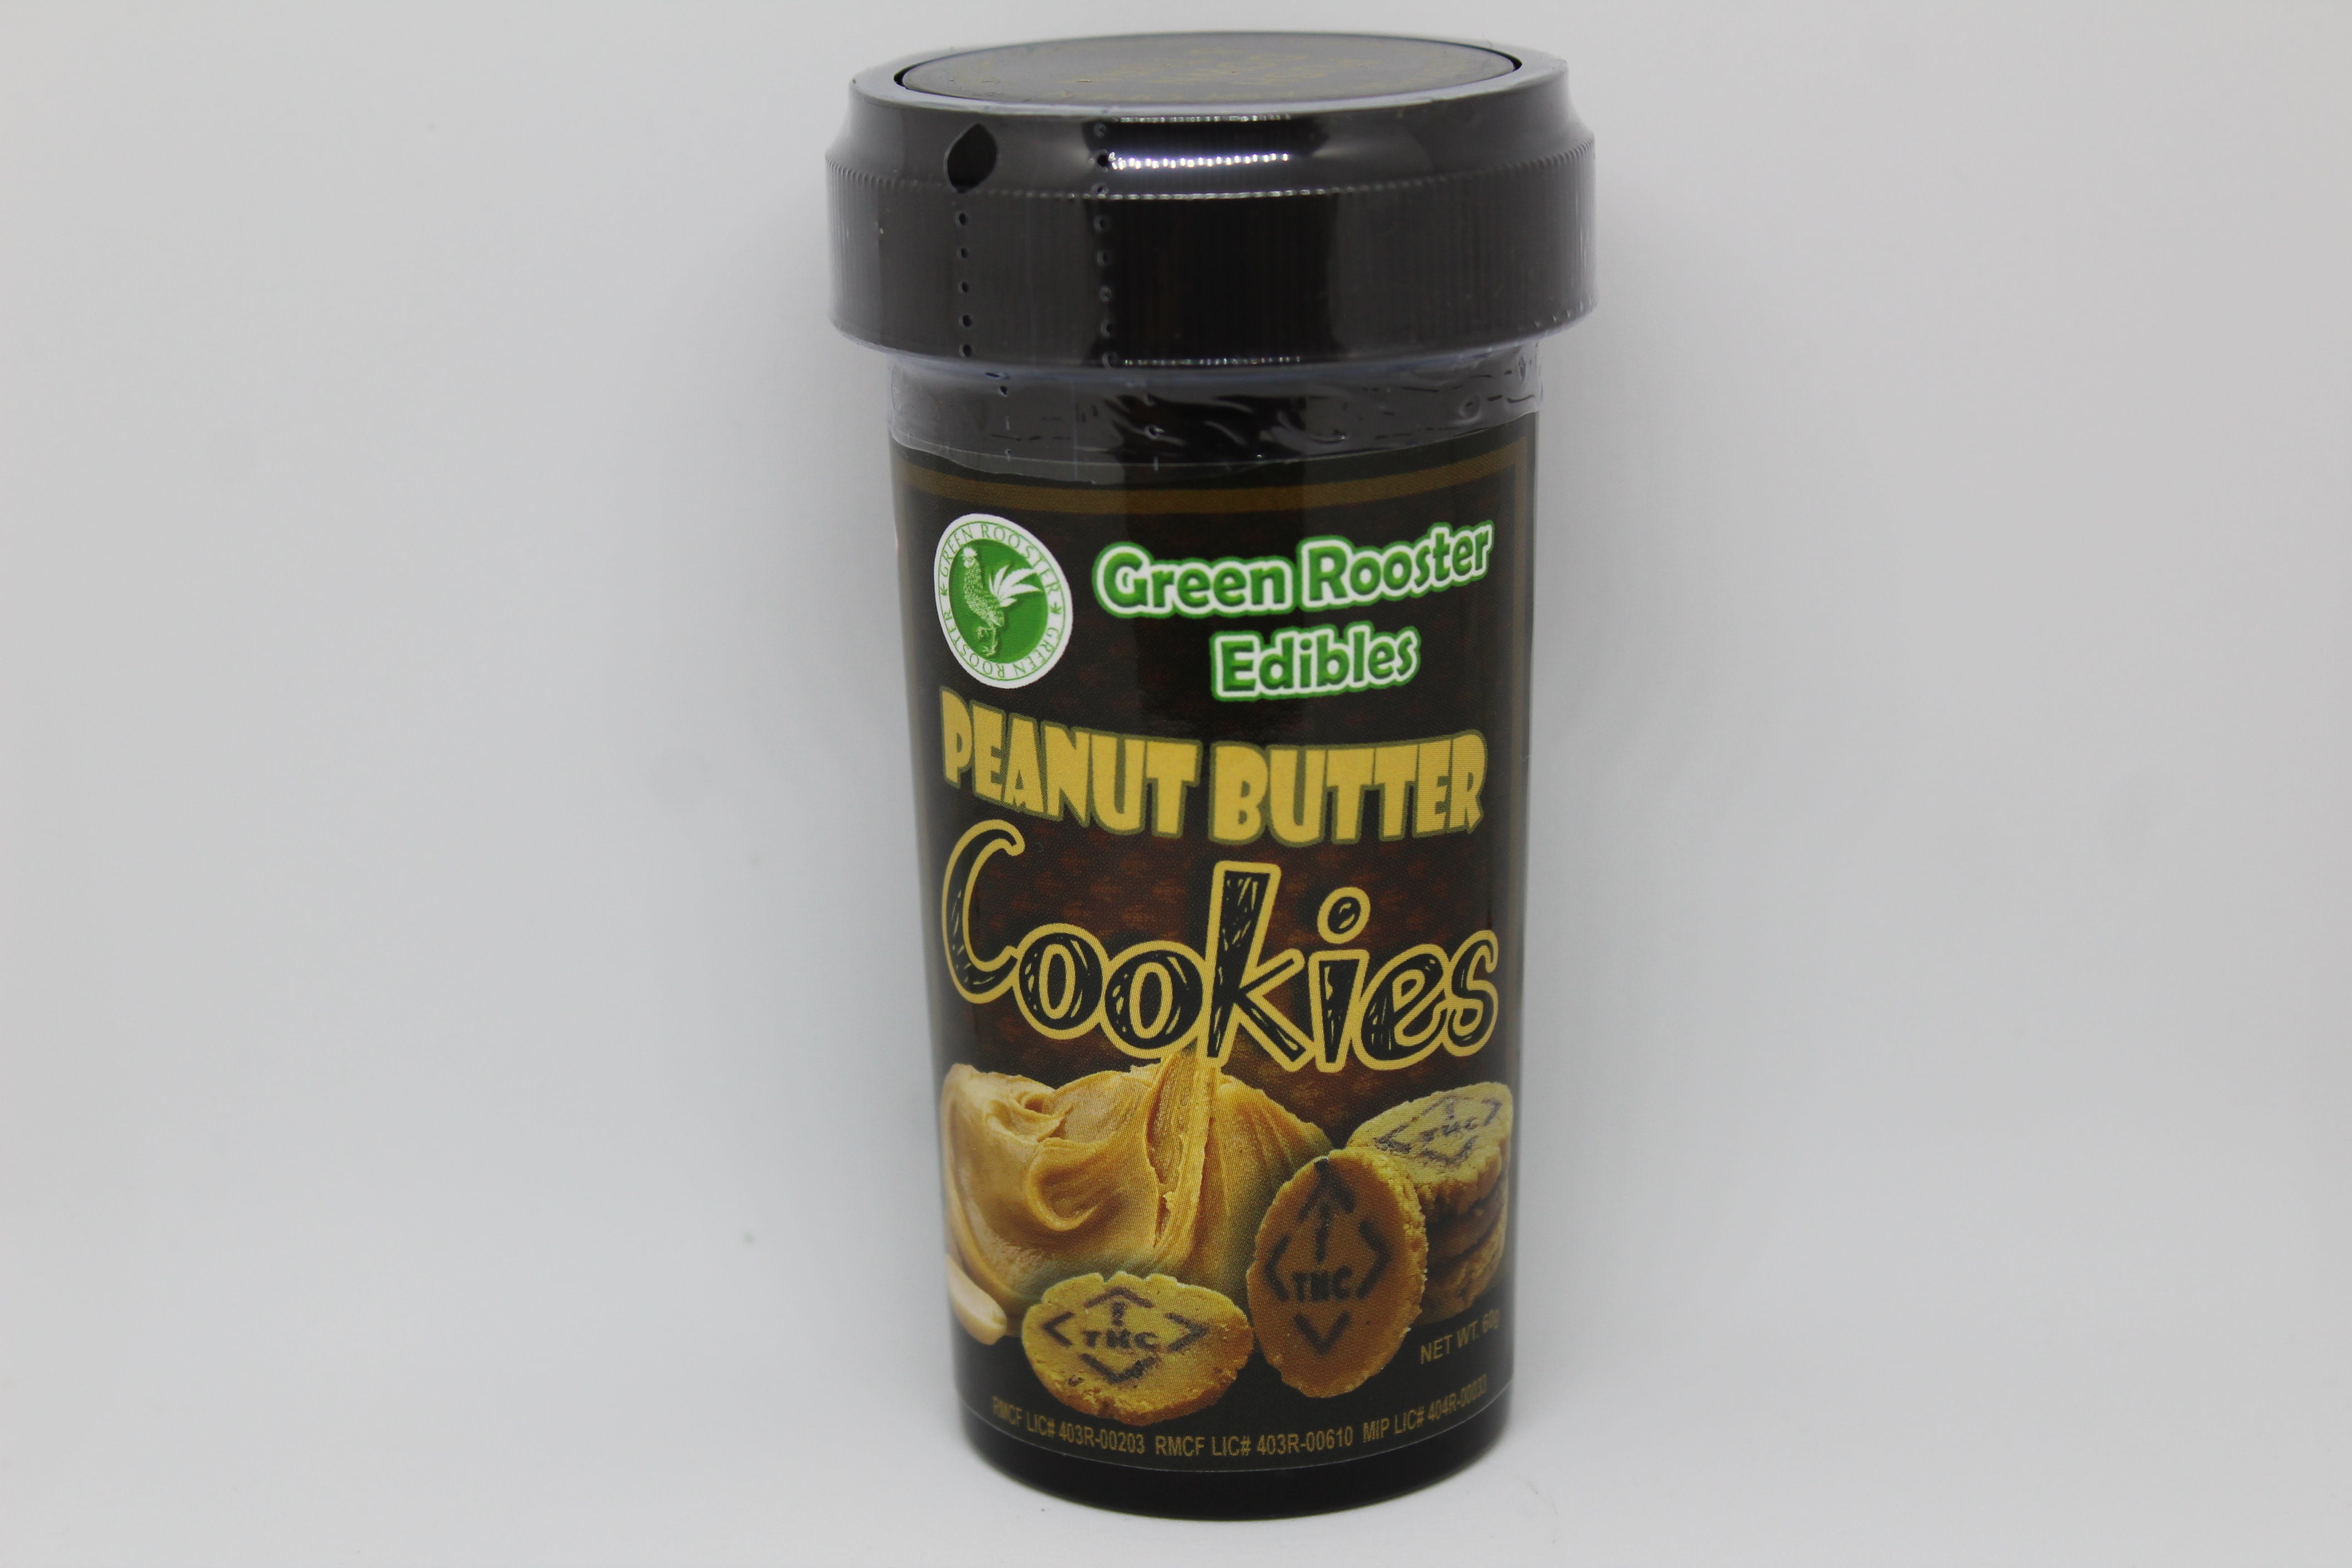 edible-green-rooster-peanut-butter-edible-100-mg-cookies-tax-included